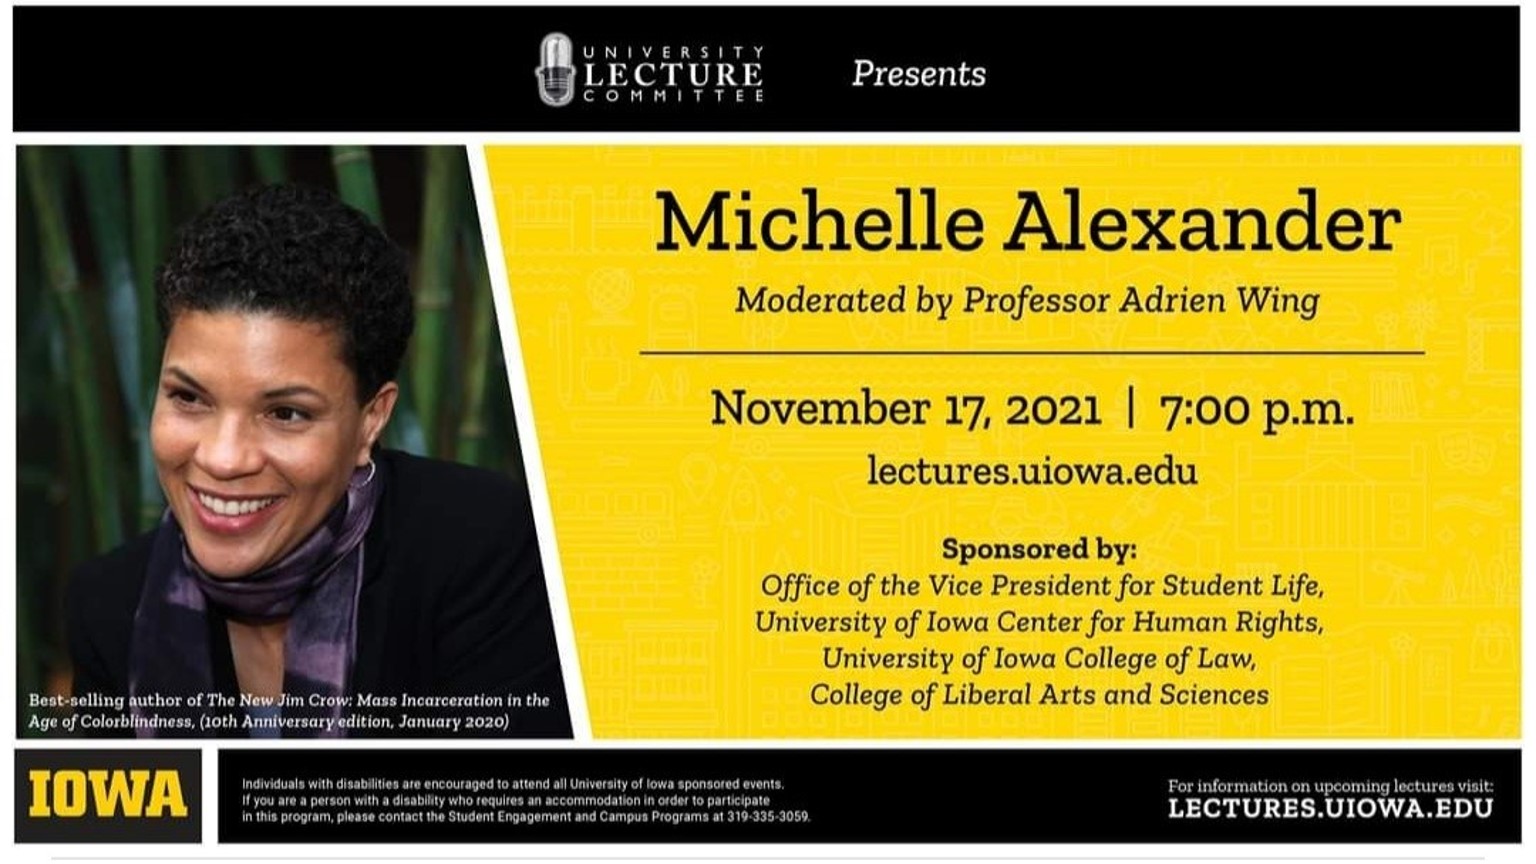 University Lecture Committee presents Michelle Alexander, moderated by Professor Adrien Wing. November 17, 2021 - 7:00 p.m. lectures.uiowa.edu Sponsored by: Office of the Vice President of Student Life, University of Iowa Center for Human Rights, University of Iowa College of Law, and the College of Liberal Arts and Sciences.